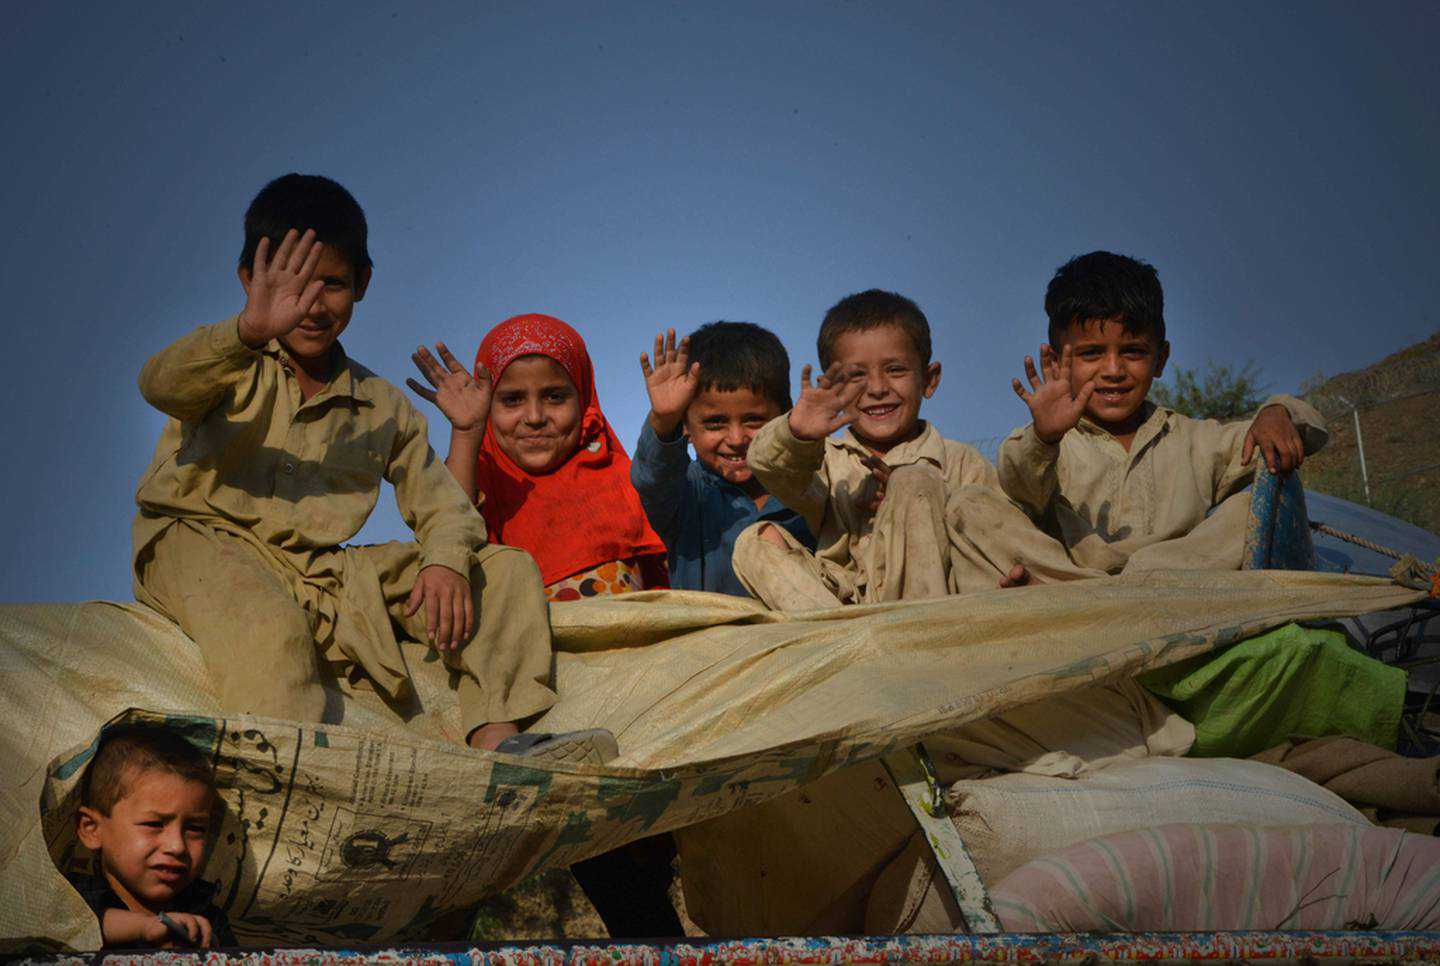 Afghan children cling to lorries to be smuggled into Pakistan